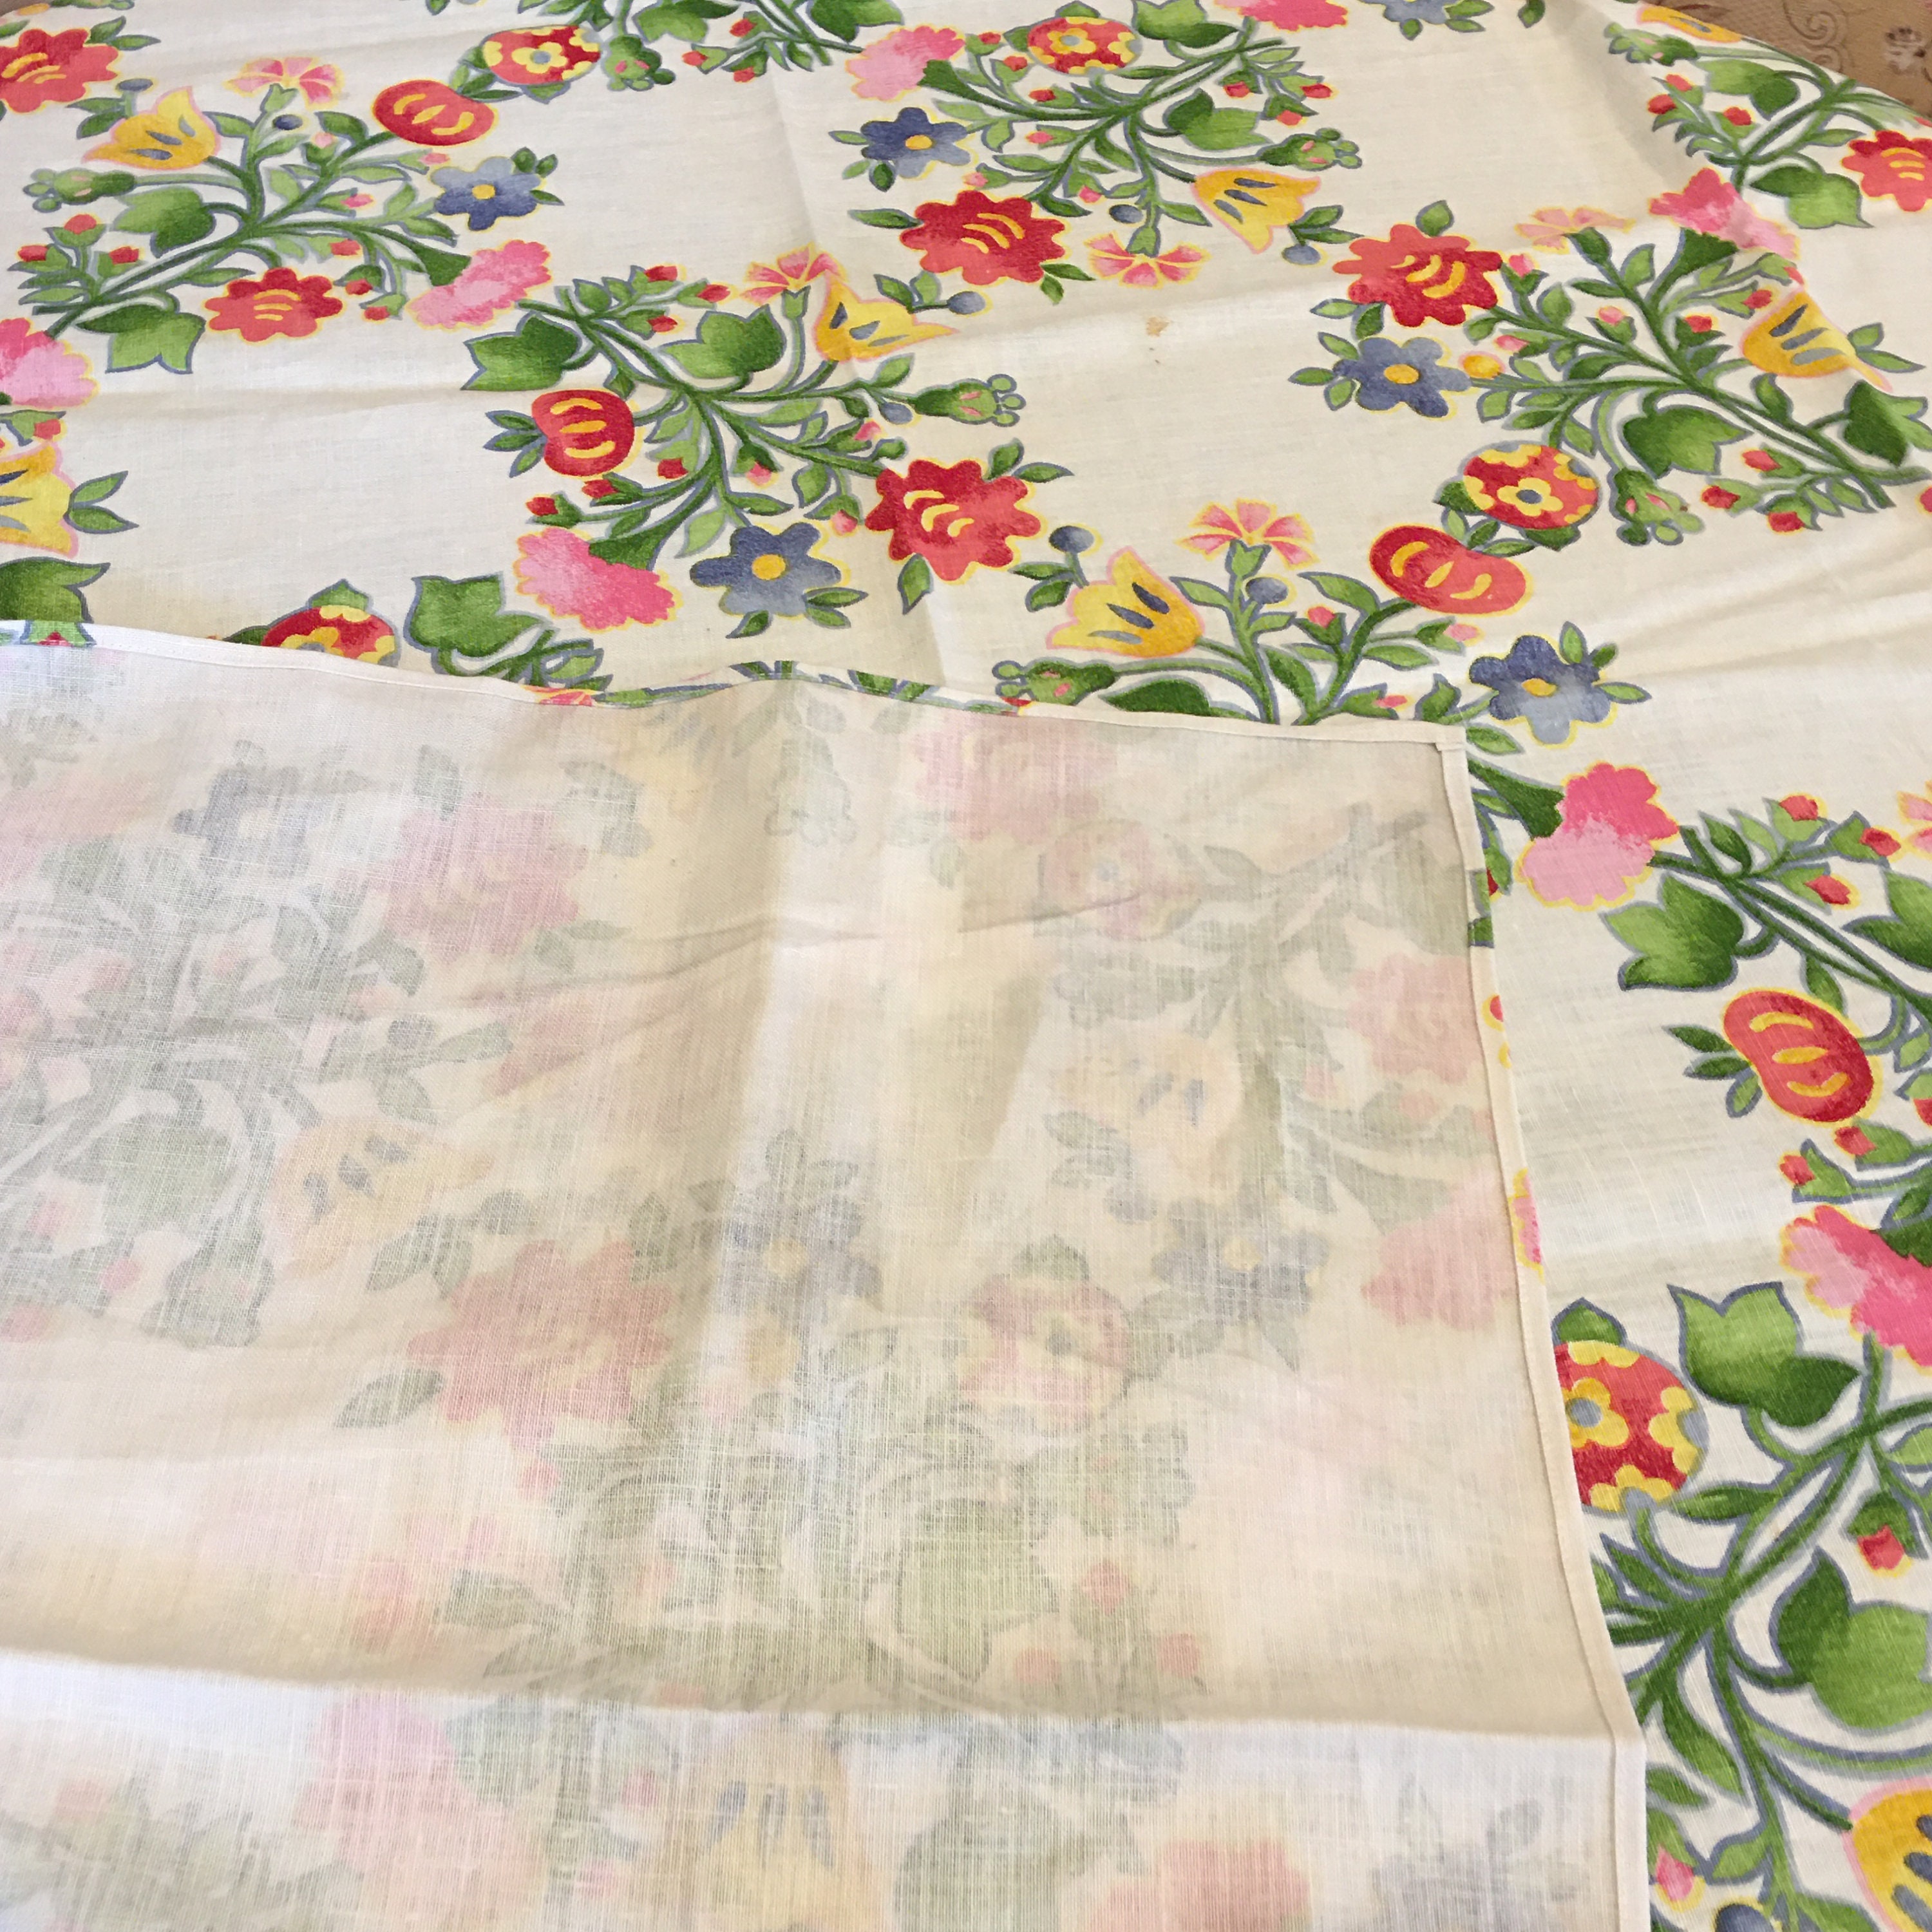 LOVIVER Vintage Tablecloth British Style Square Floral Table Cover Decor 140140cm